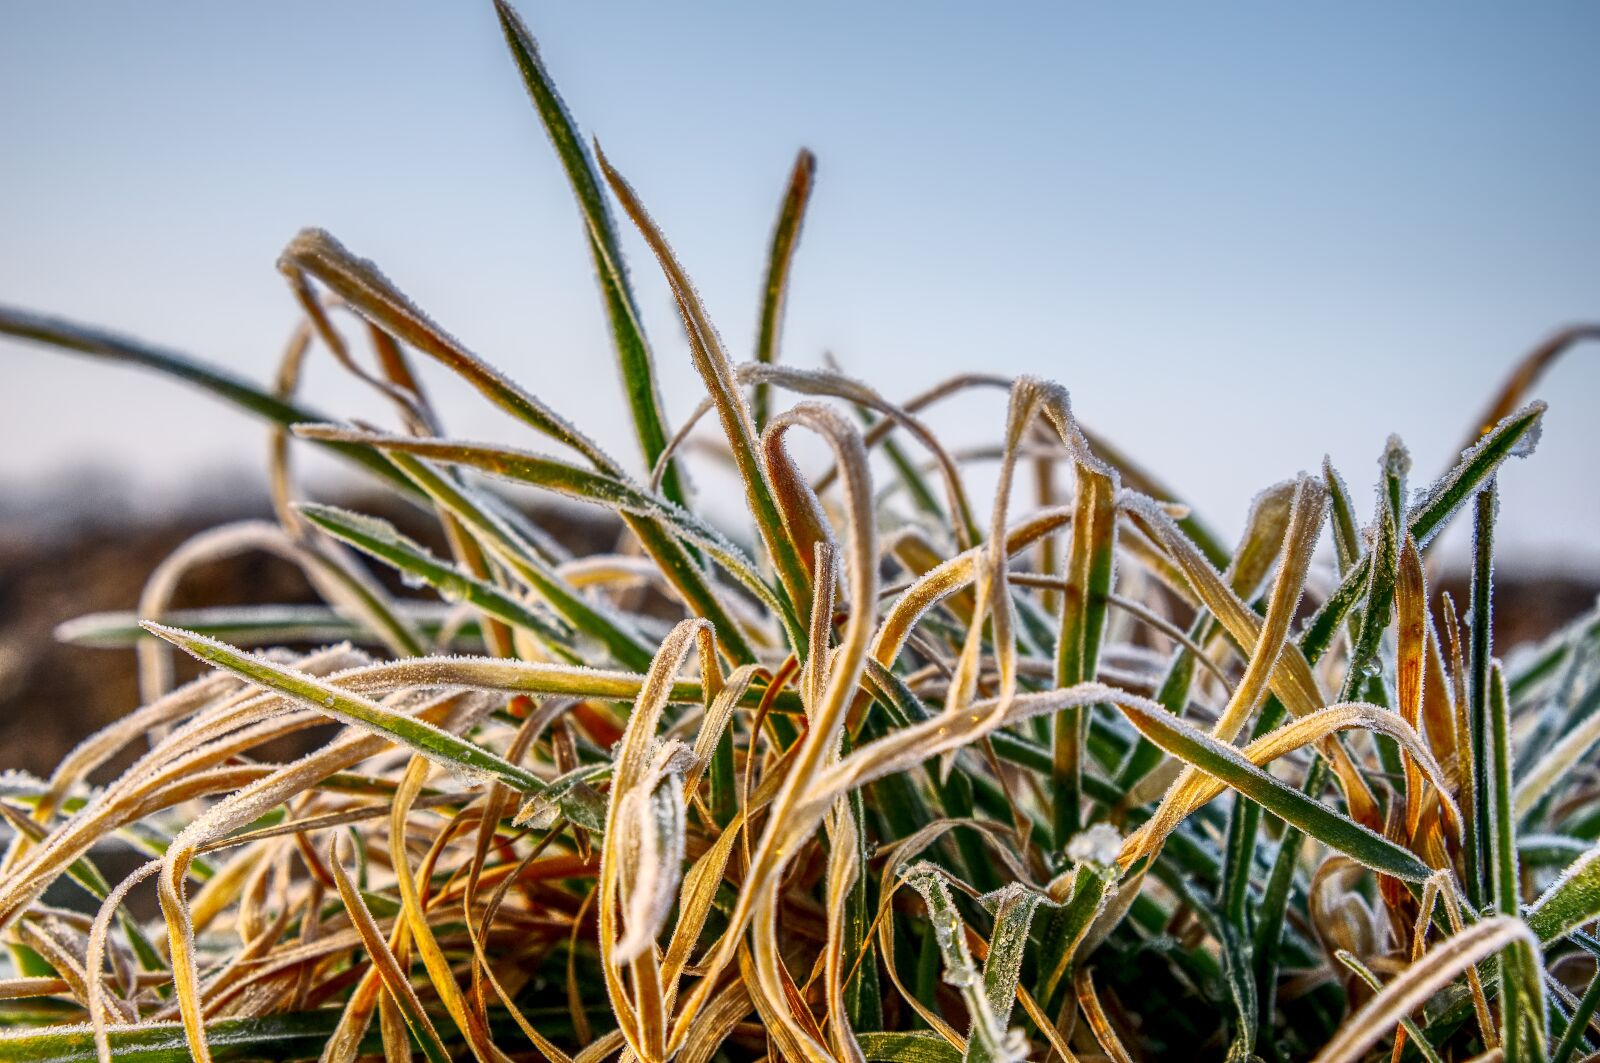 Sony a6000 sample photo. Grass, frozen, cold photography